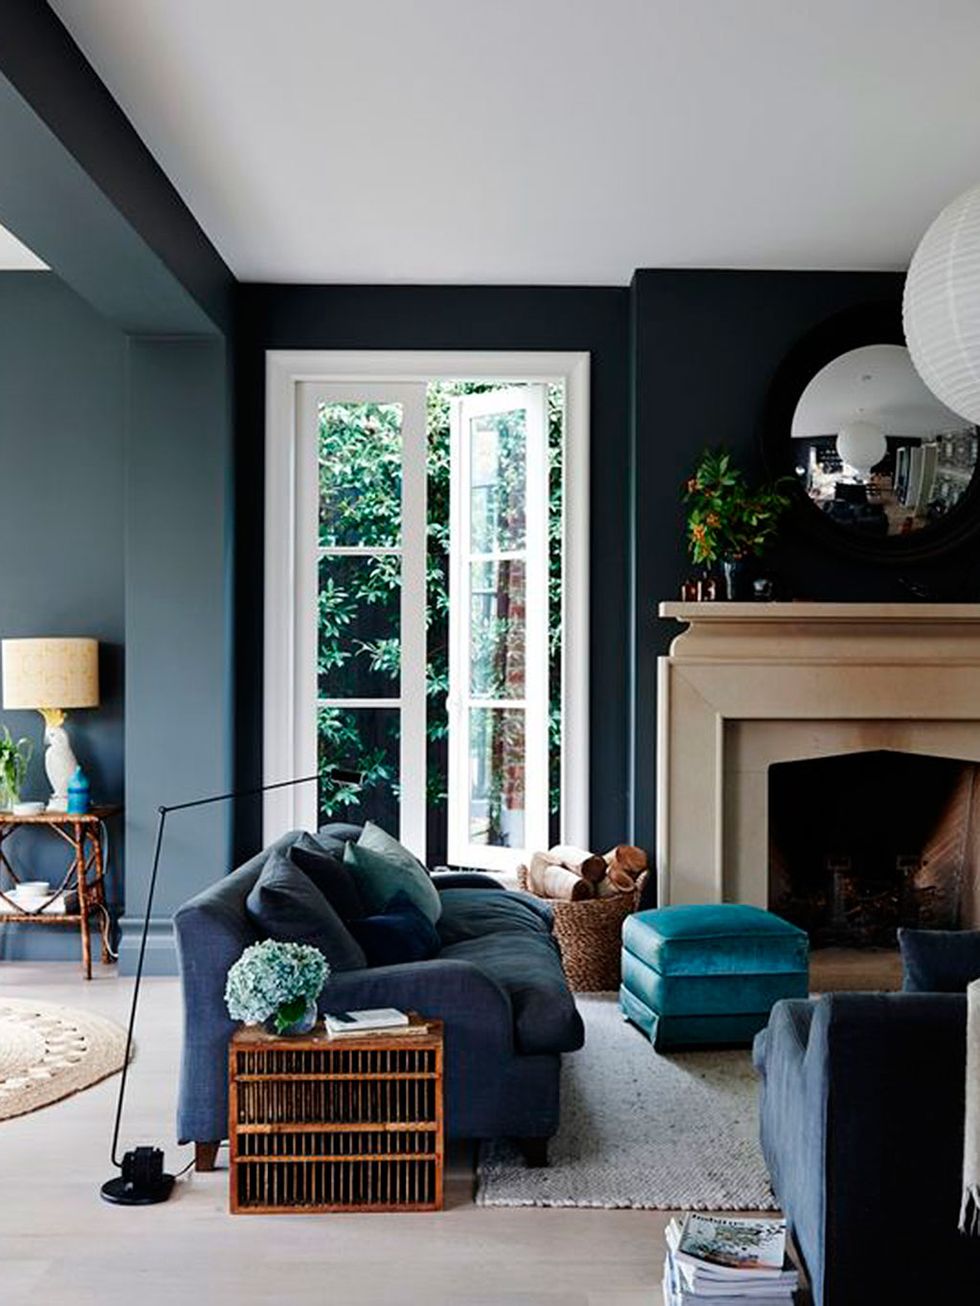 15 Colors to Paint Your House With